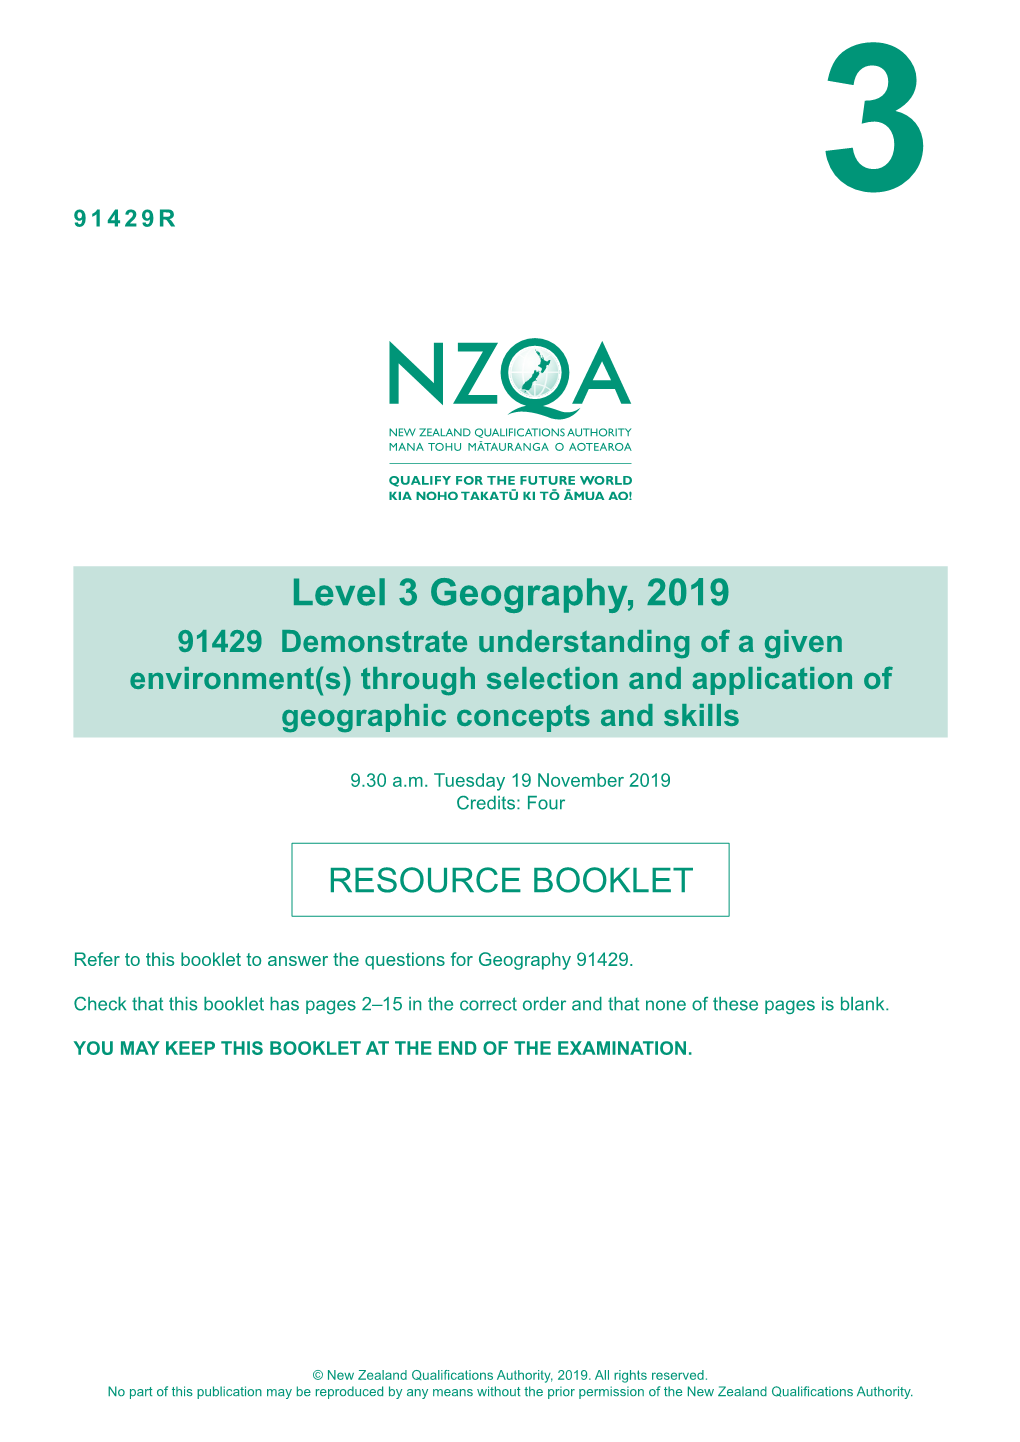 Level 3 Geography (91429) 2019